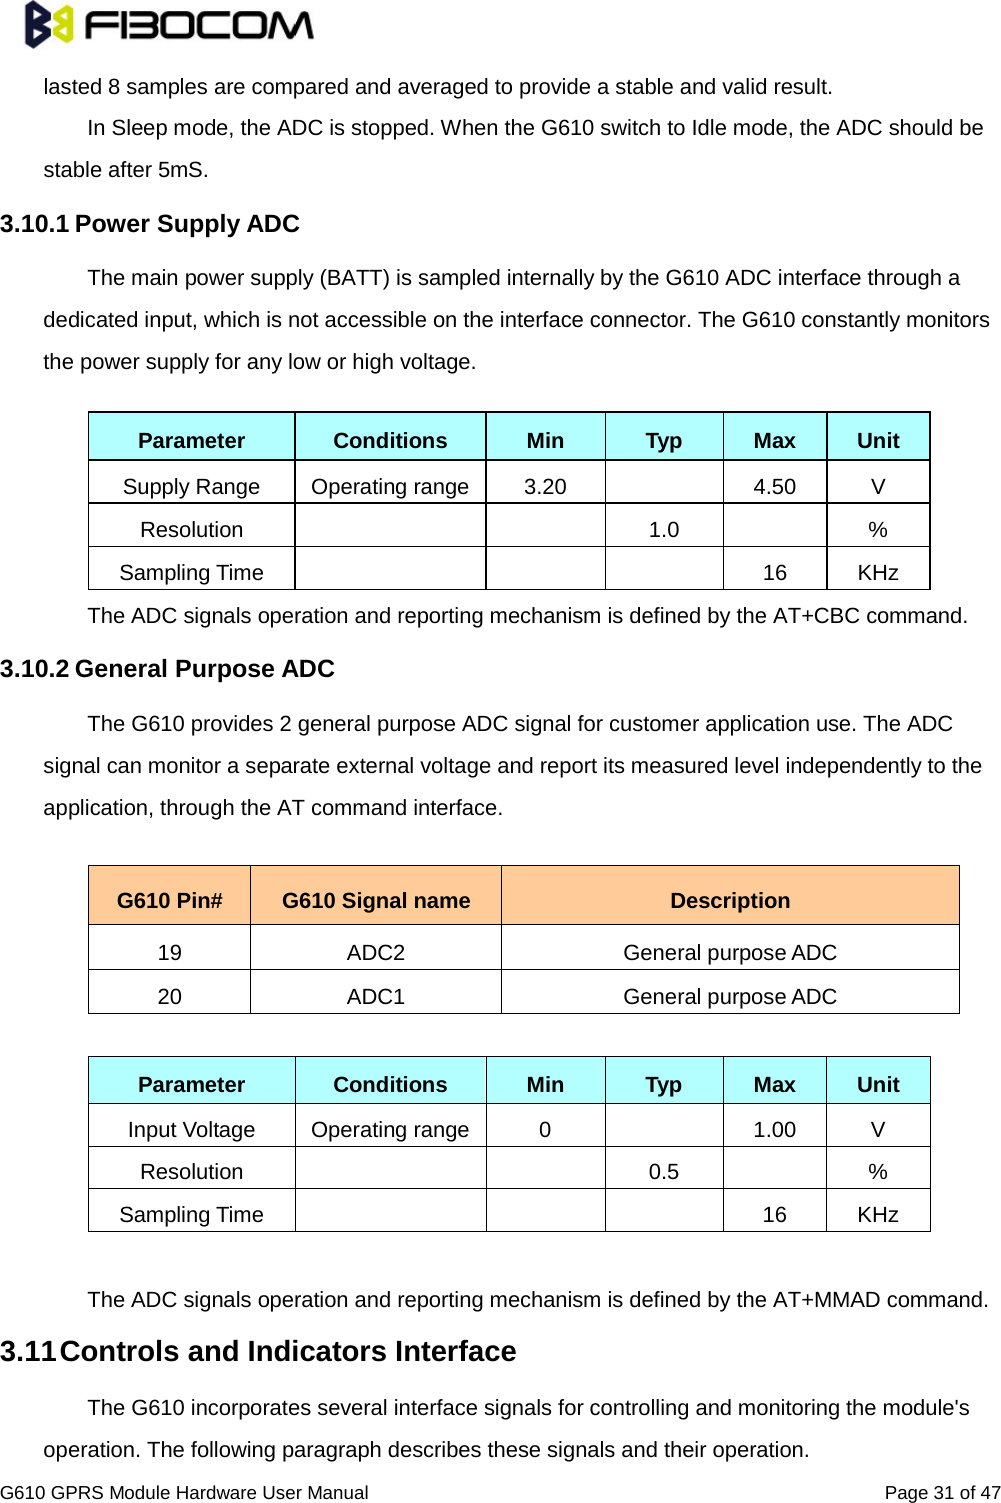                                                                                                          G610 GPRS Module Hardware User Manual                                                          Page 31 of 47  lasted 8 samples are compared and averaged to provide a stable and valid result.   In Sleep mode, the ADC is stopped. When the G610 switch to Idle mode, the ADC should be stable after 5mS.   3.10.1 Power Supply ADC   The main power supply (BATT) is sampled internally by the G610 ADC interface through a dedicated input, which is not accessible on the interface connector. The G610 constantly monitors the power supply for any low or high voltage.  Parameter Conditions Min Typ Max Unit Supply Range Operating range 3.20    4.50  V Resolution      1.0    % Sampling Time        16 KHz The ADC signals operation and reporting mechanism is defined by the AT+CBC command.   3.10.2 General Purpose ADC   The G610 provides 2 general purpose ADC signal for customer application use. The ADC signal can monitor a separate external voltage and report its measured level independently to the application, through the AT command interface.    G610 Pin# G610 Signal name Description 19 ADC2 General purpose ADC 20 ADC1 General purpose ADC  Parameter Conditions Min Typ Max Unit Input Voltage  Operating range  0    1.00  V Resolution      0.5    % Sampling Time        16 KHz  The ADC signals operation and reporting mechanism is defined by the AT+MMAD command.   3.11 Controls and Indicators Interface   The G610 incorporates several interface signals for controlling and monitoring the module&apos;s operation. The following paragraph describes these signals and their operation.   